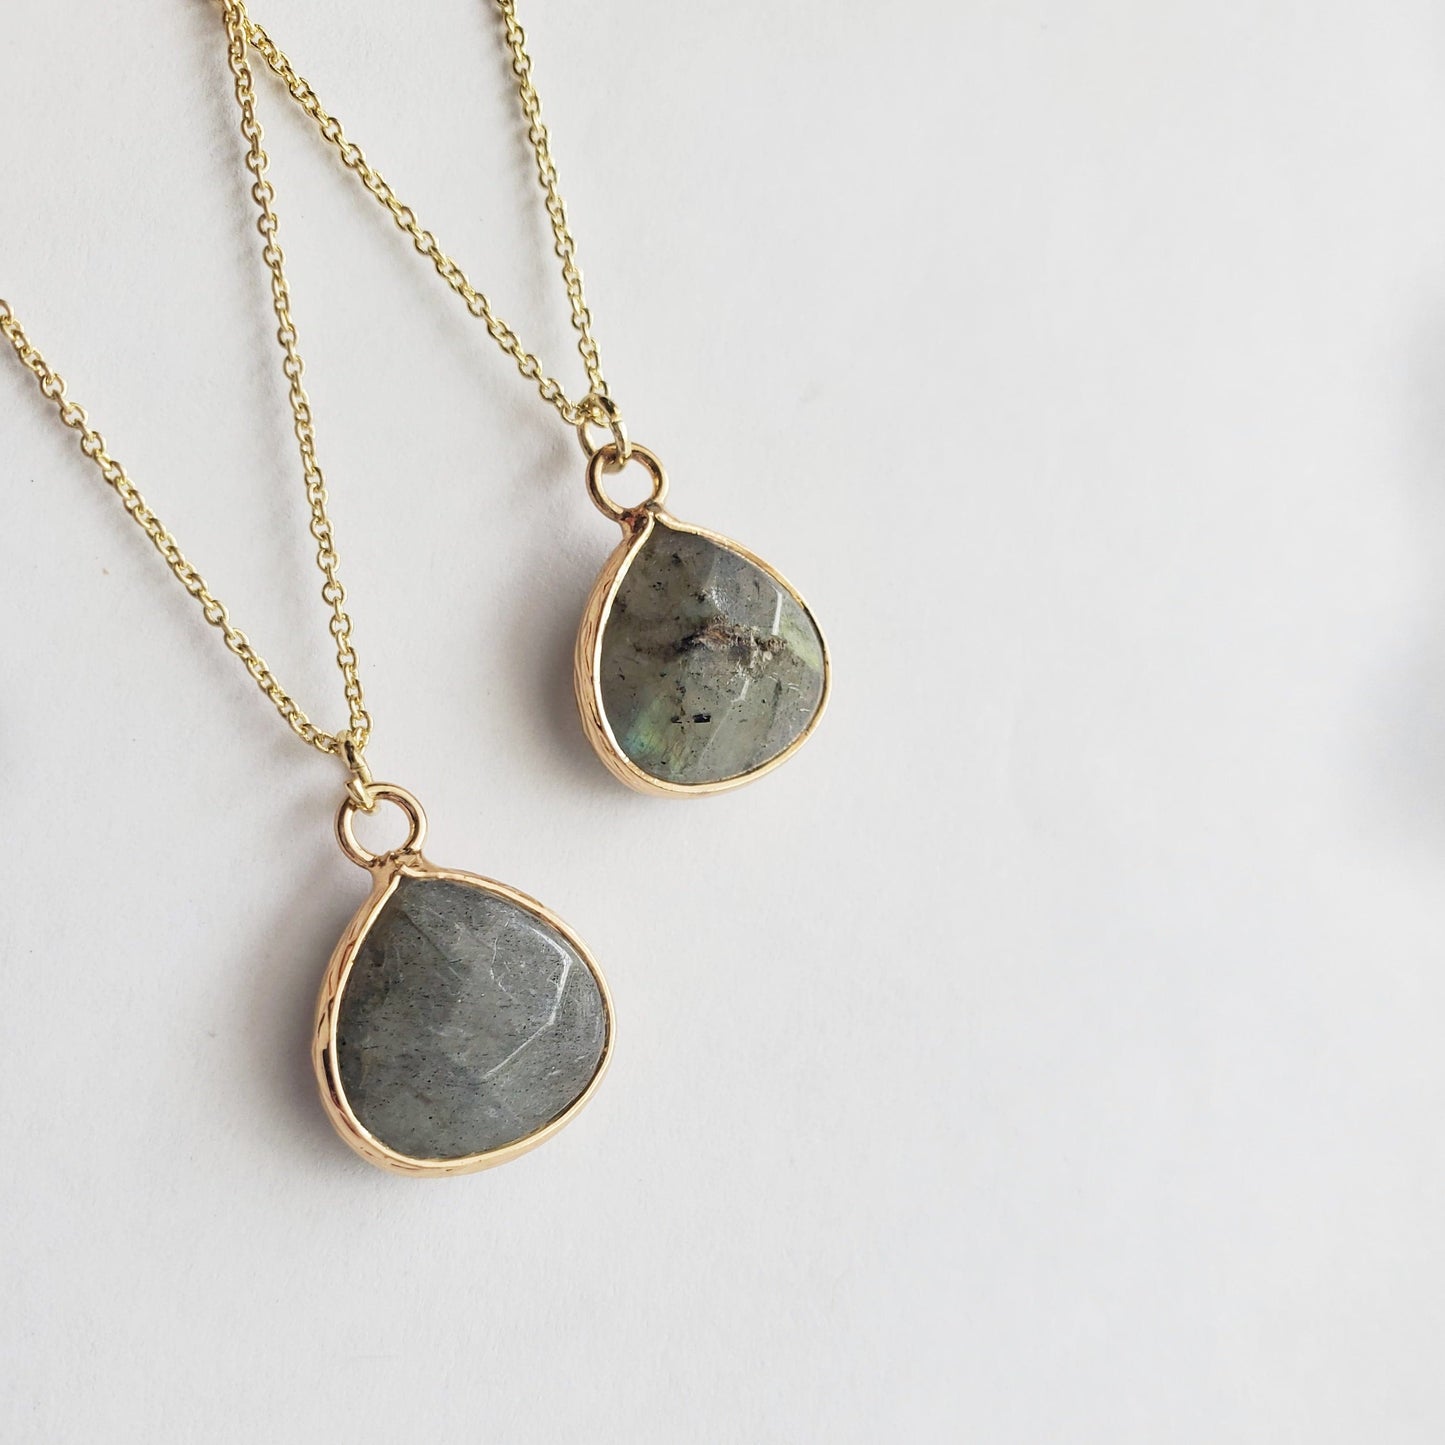 LABRADORITE | Crystal for Creativity, Synchronicity, and Magic | 14K Gold Adjustable Cable Chain Pendant Necklace | Minimalist Necklace